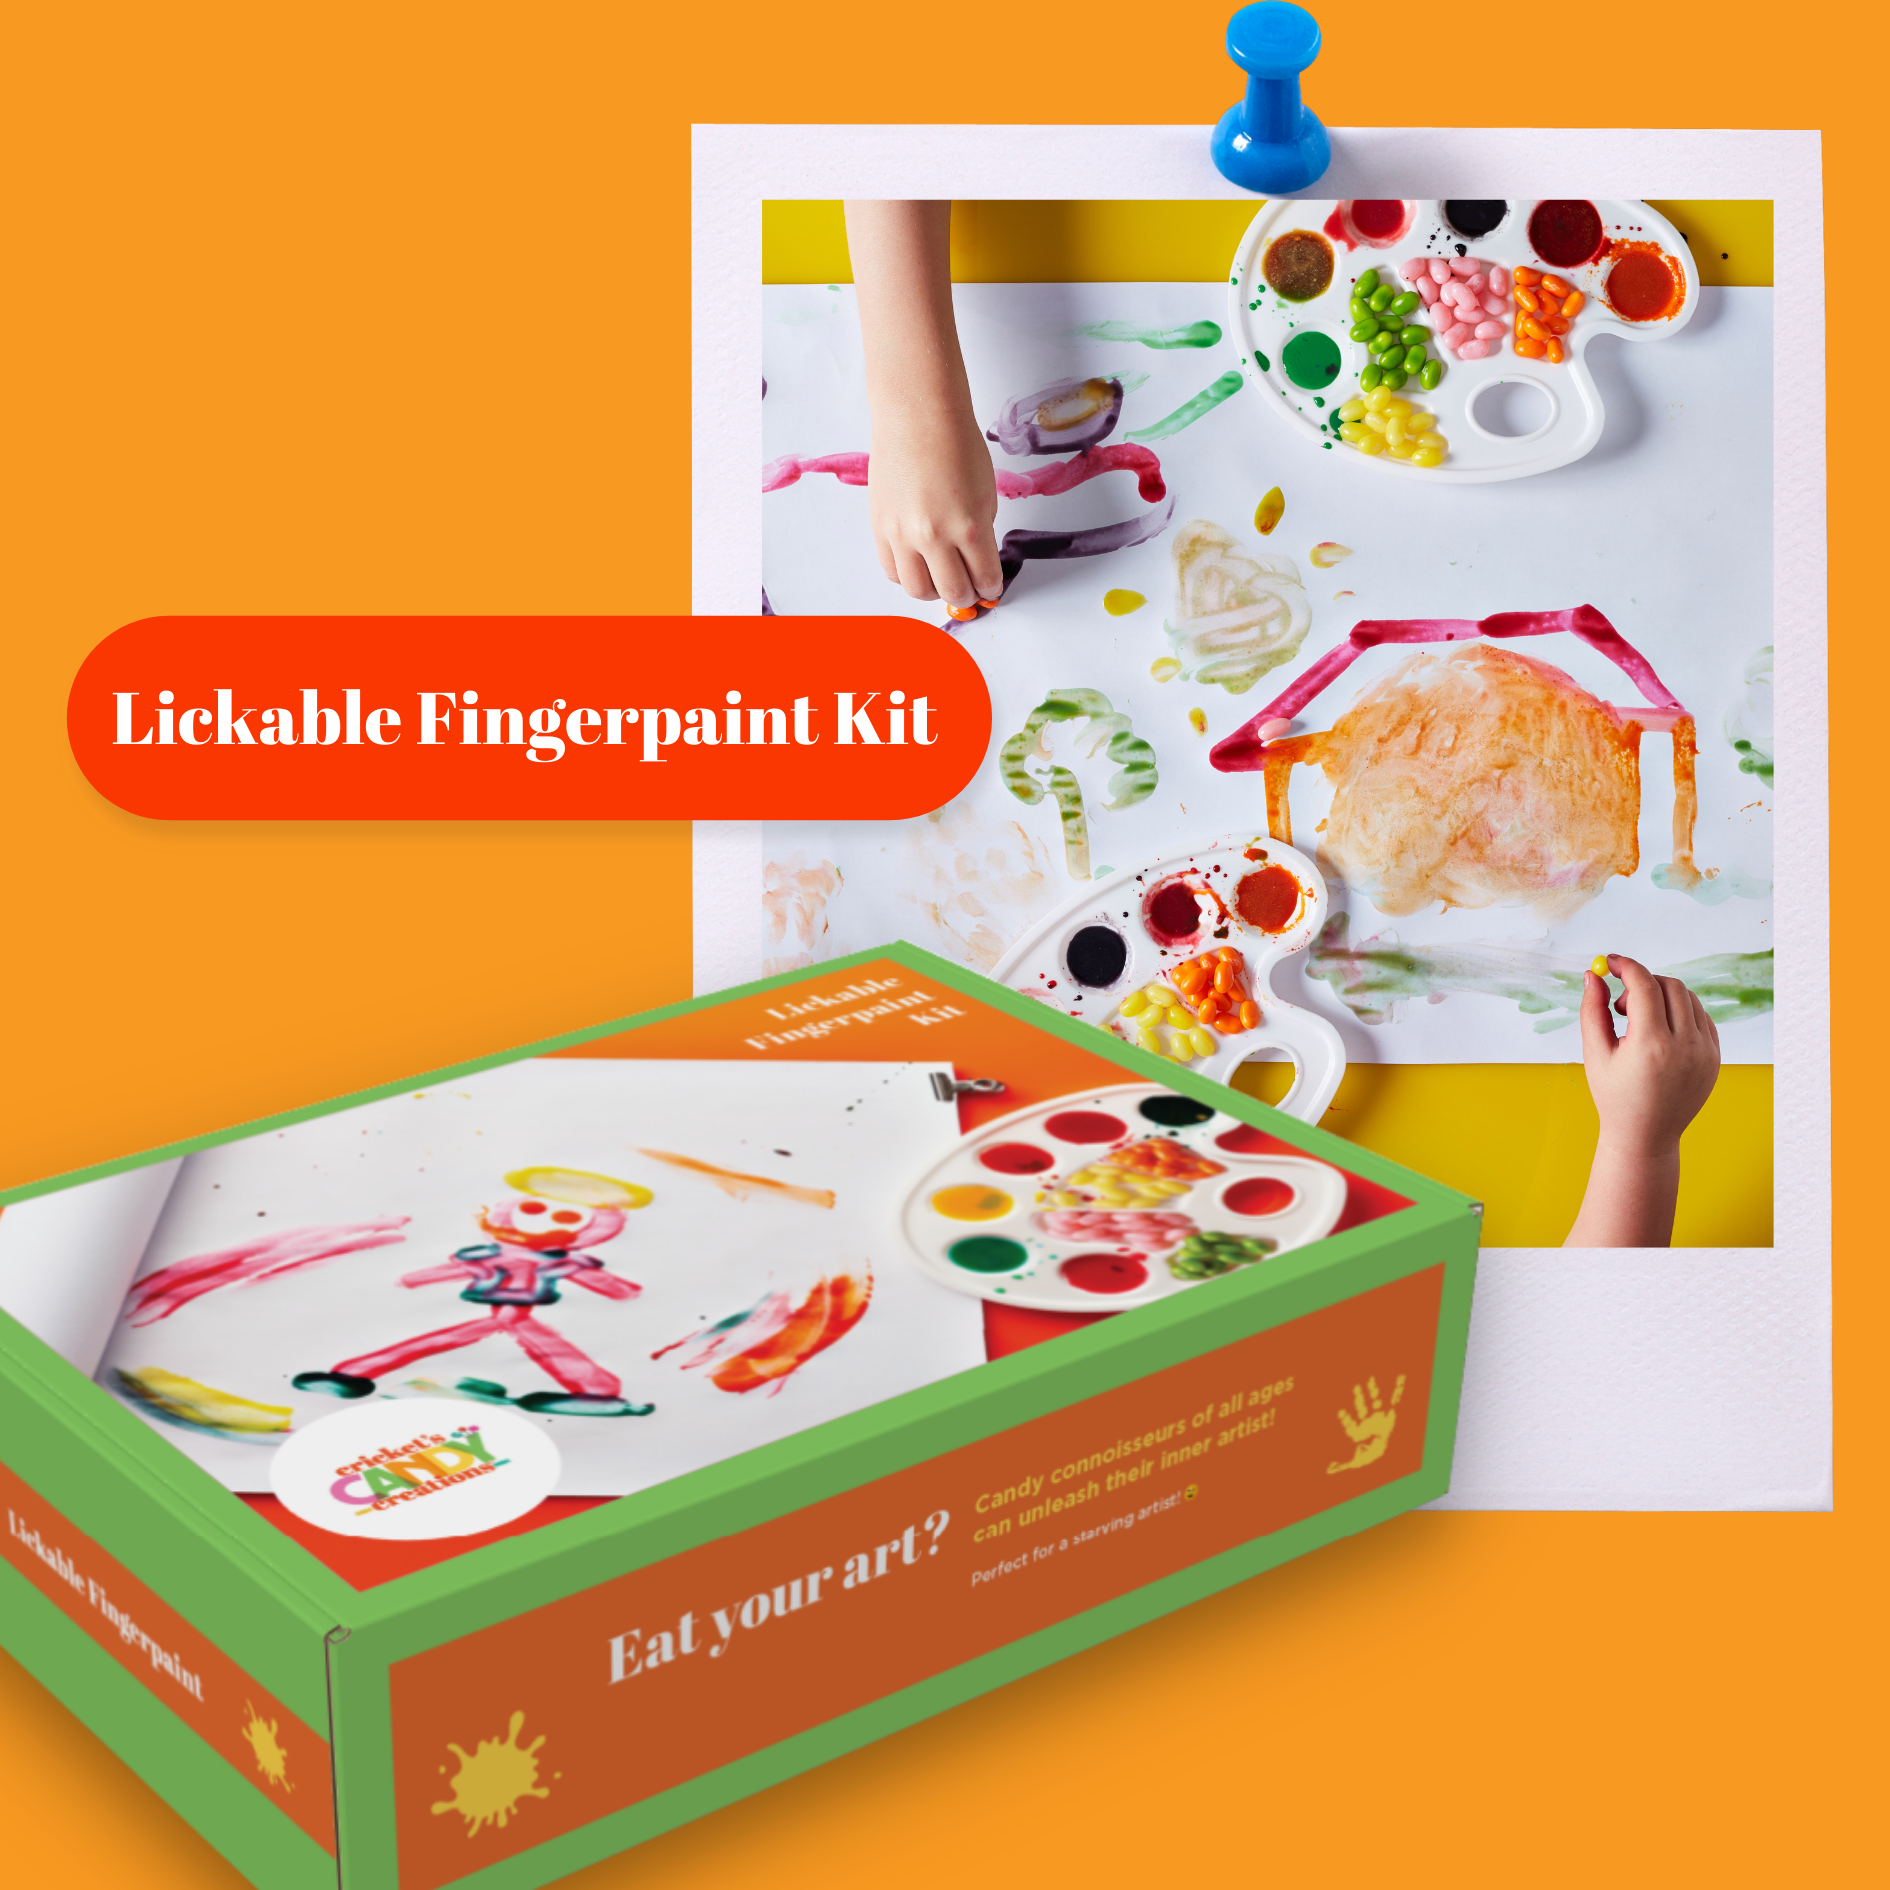 Edible Lickable Finger Paint Craft Kit from Cricket’s Candy Creations